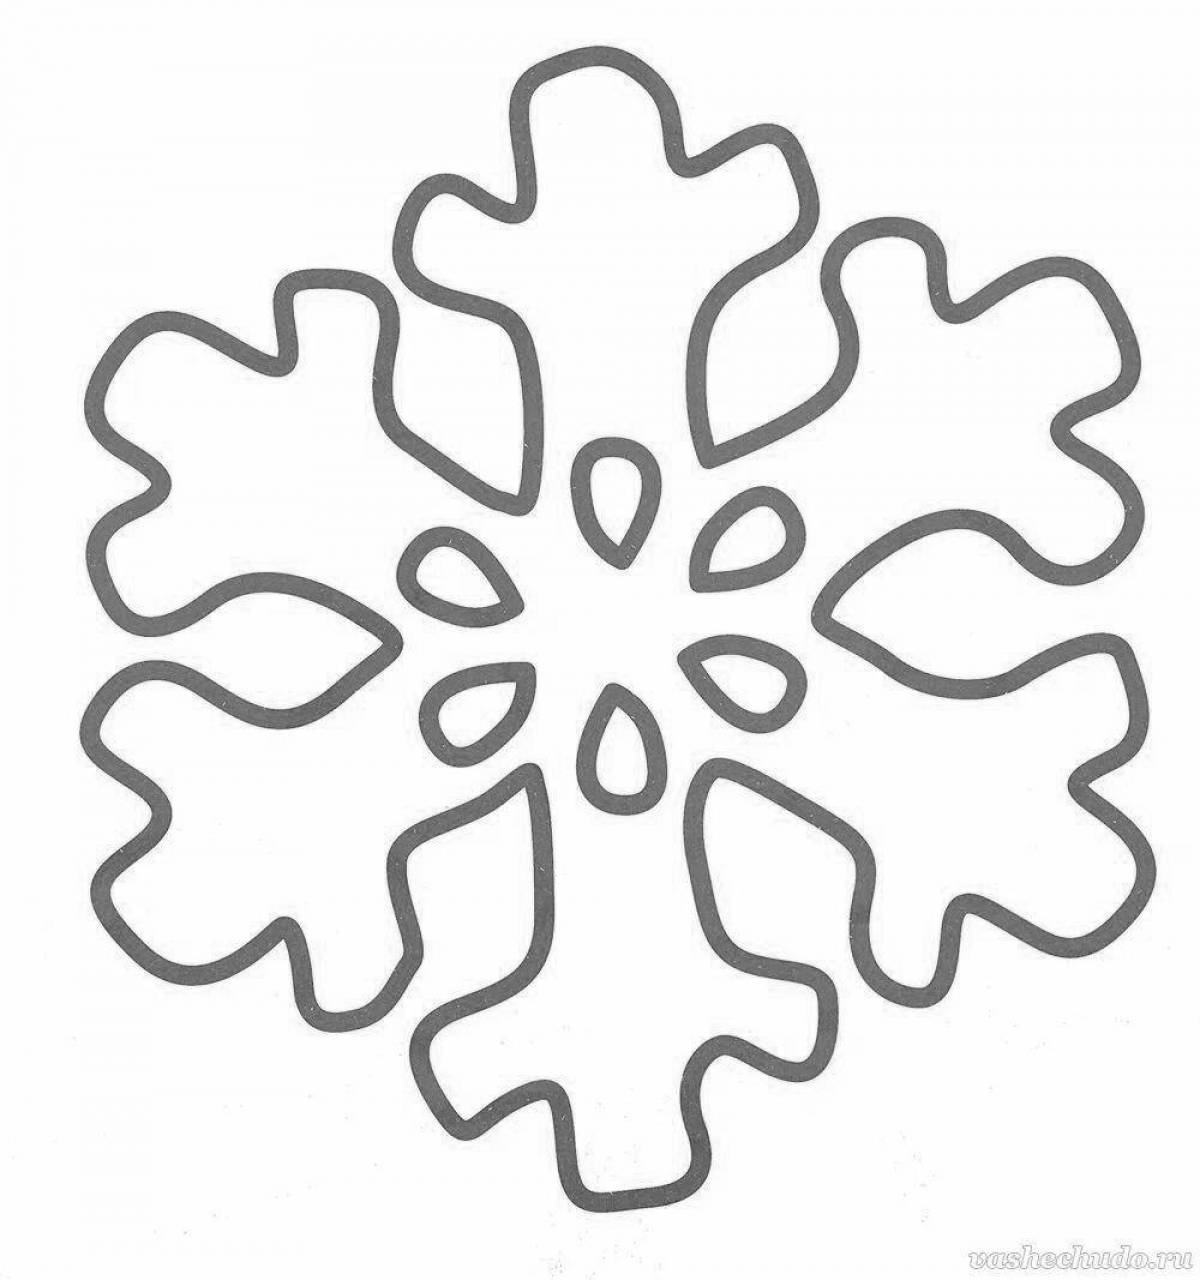 Exquisite snowflake coloring book for 4-5 year olds in kindergarten